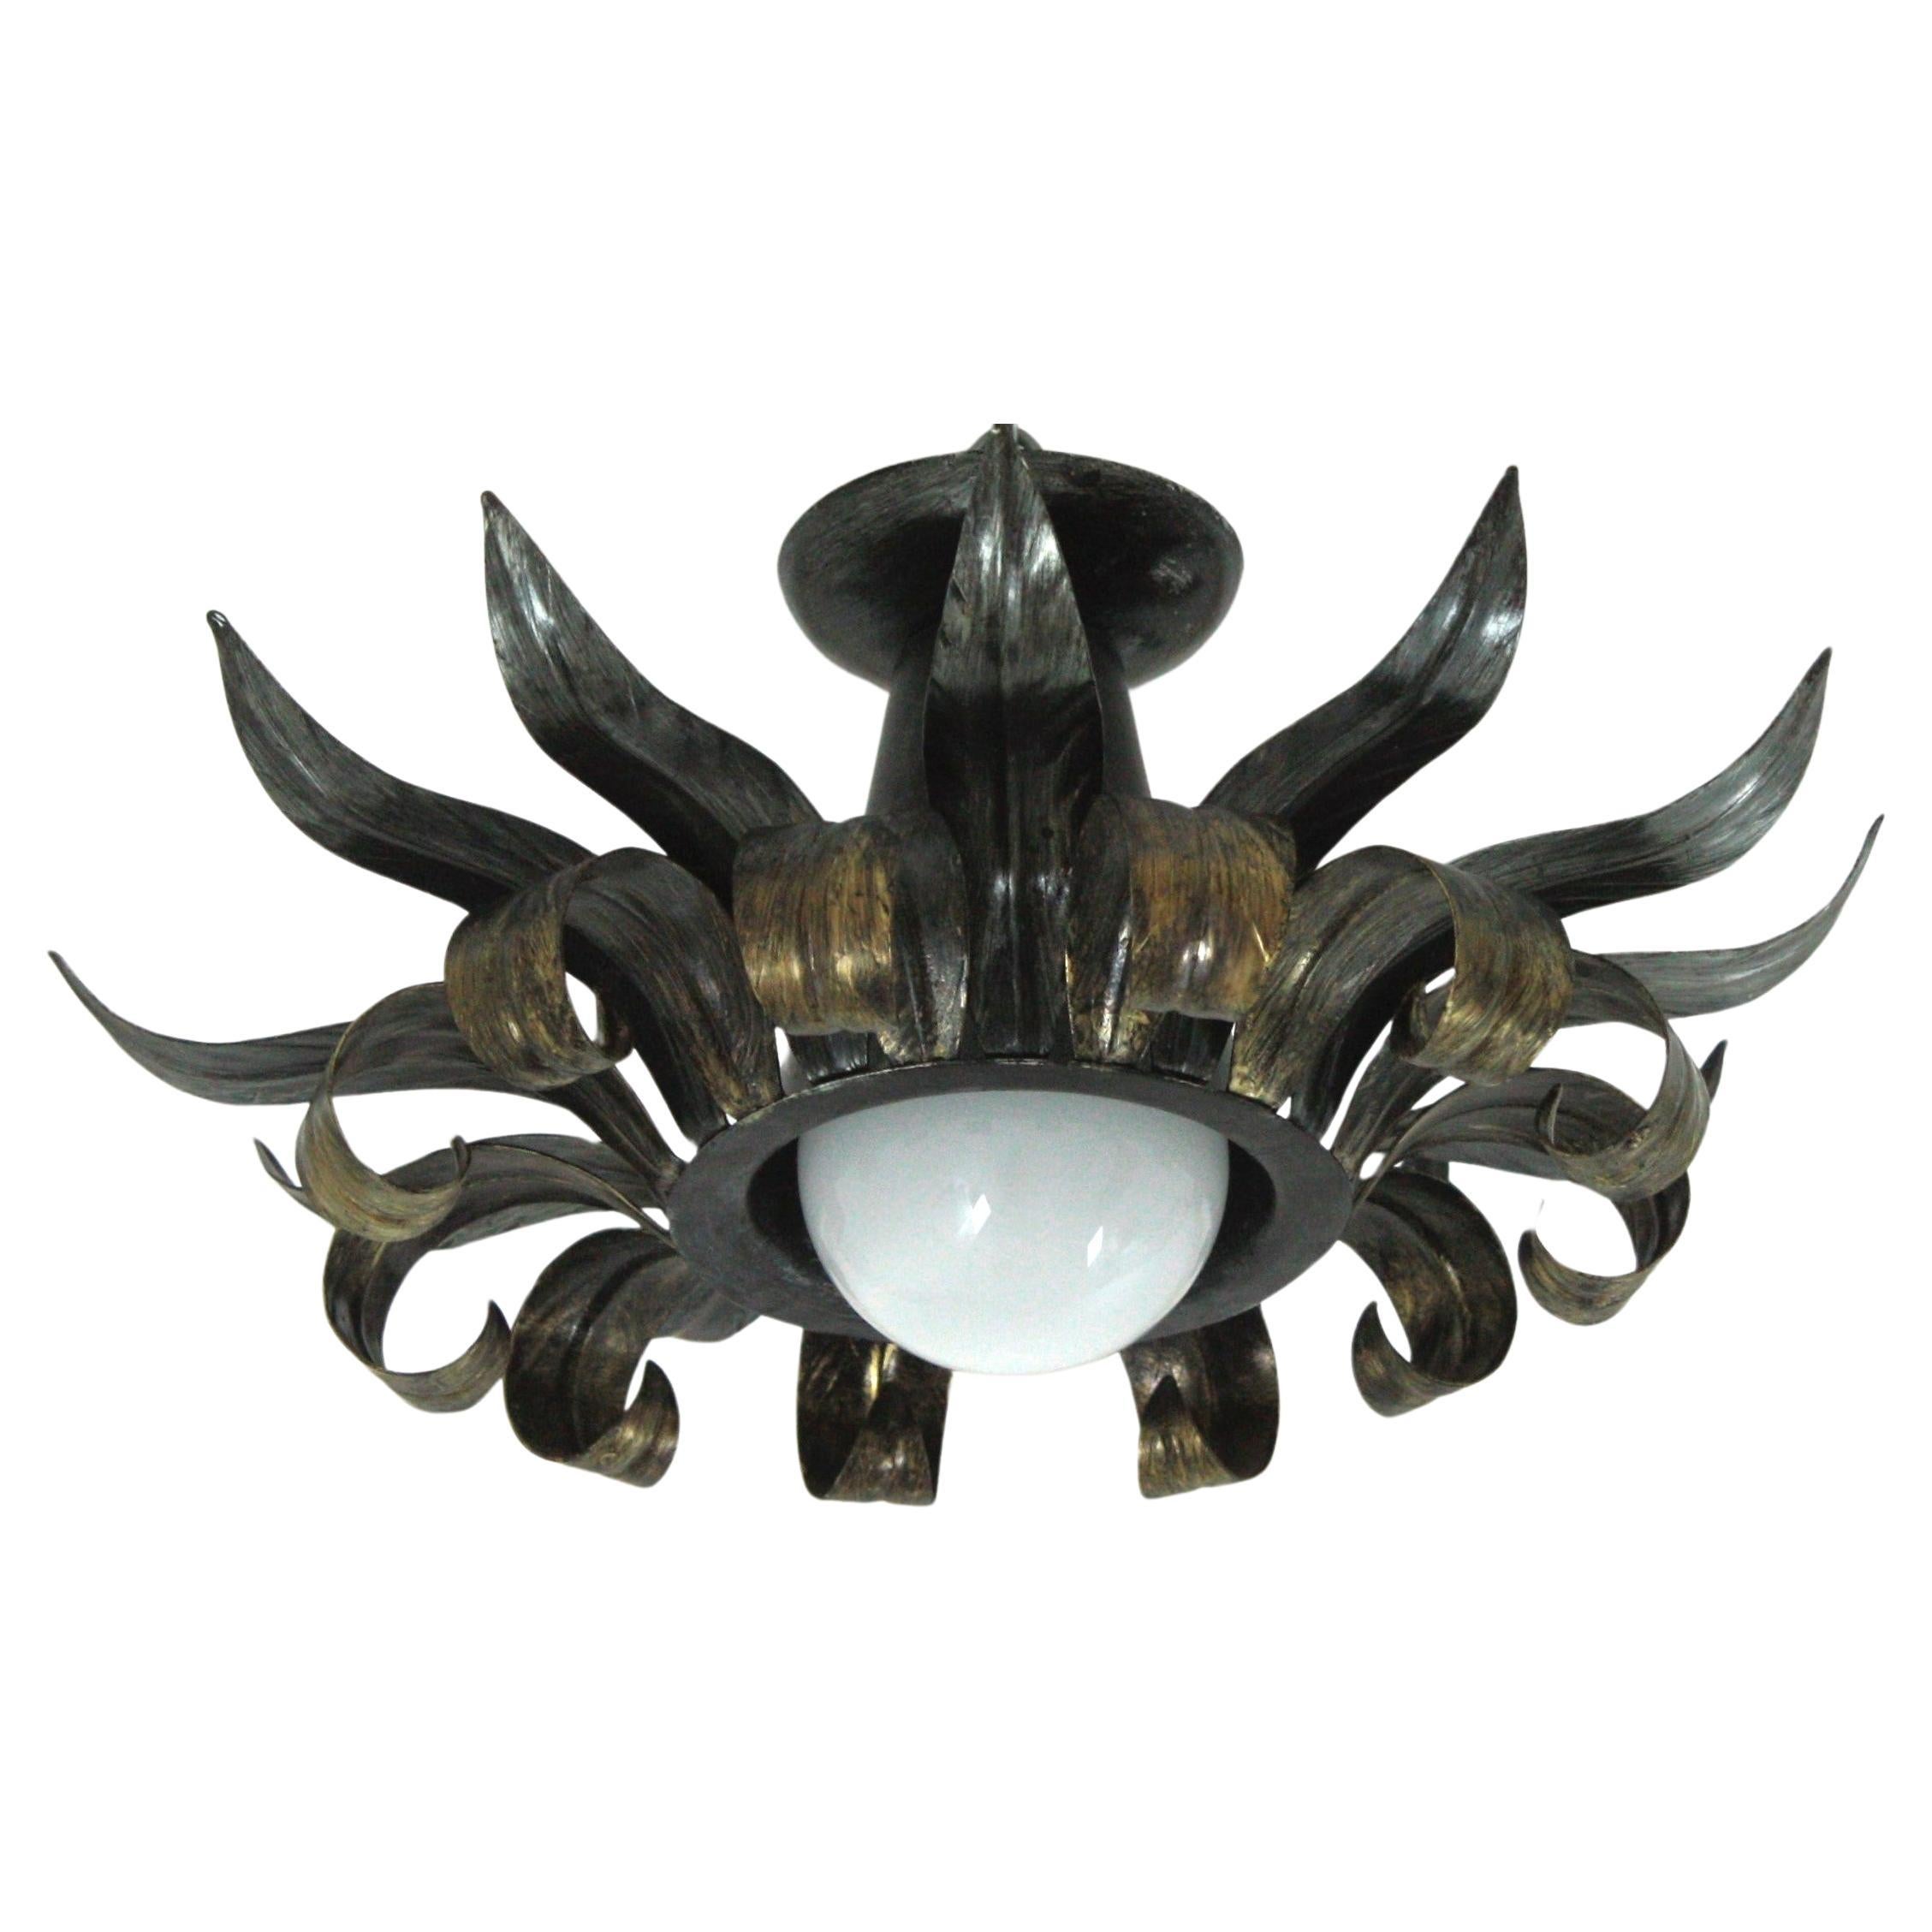 Brutalist silver and gilt patinated metal sunburst light fixture, France, 1950s.
Eye-catching iron sunburst flush mount with alternating rays in eye-lash shape. Patinated in silver color with golden accents. Nice aged patina and original finish.
It